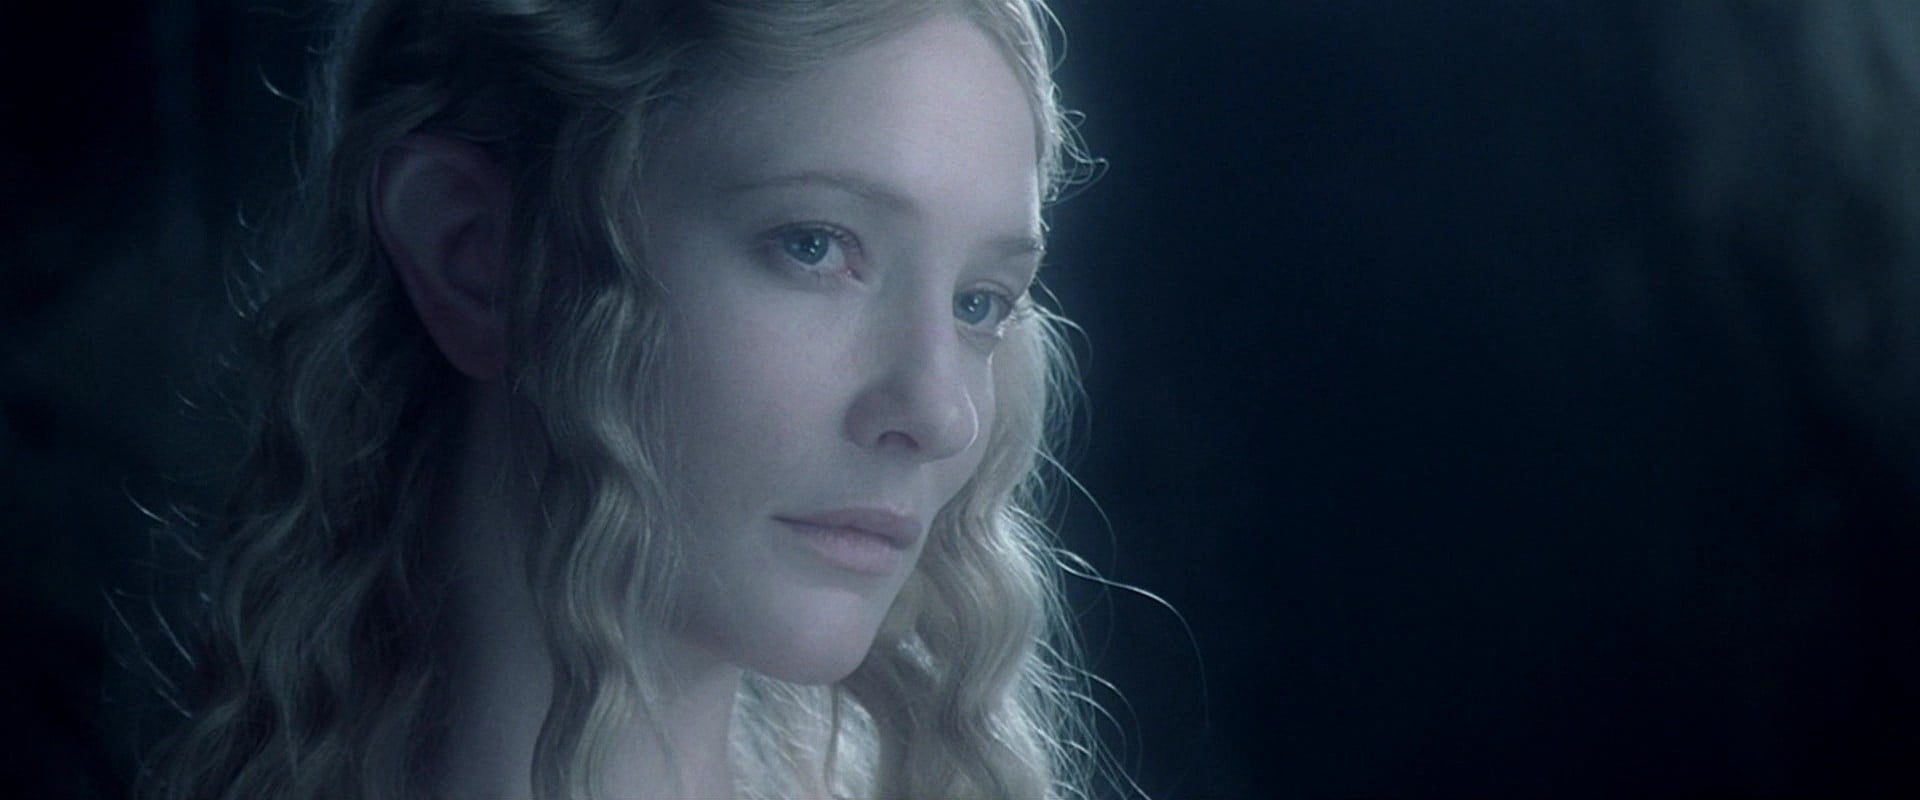 The Lord Of The Rings Character Galadriel Cate Blanchett The Lord Of